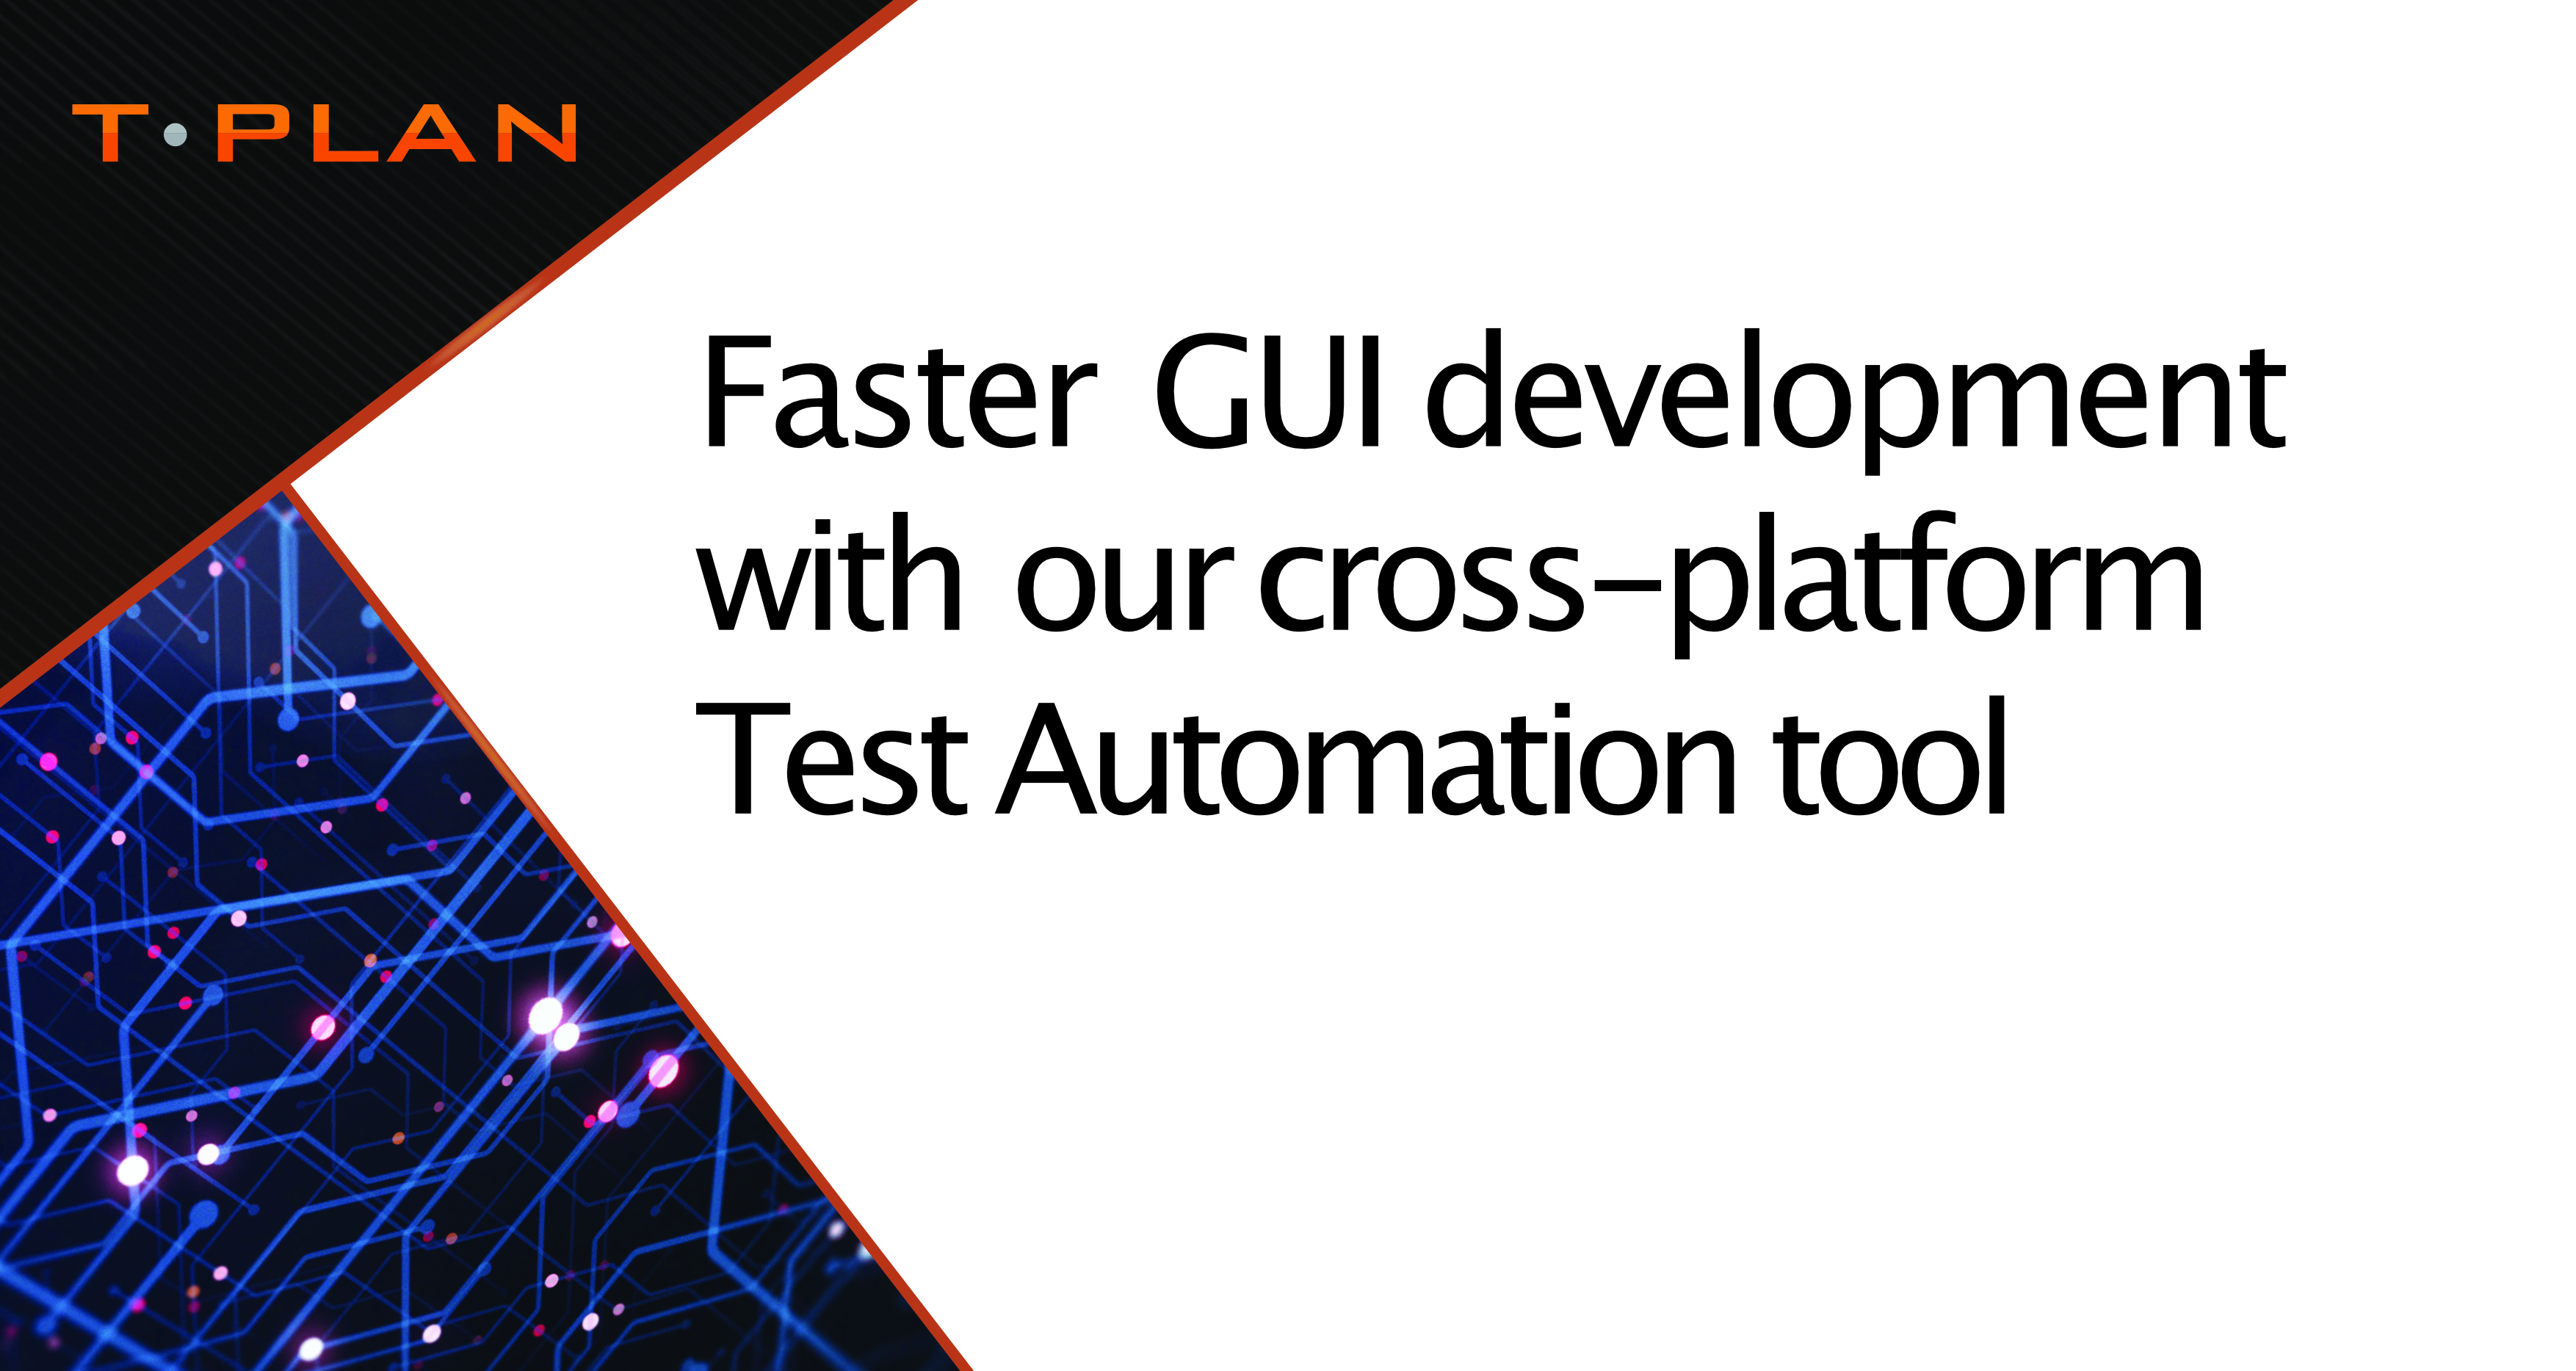 Accelerate GUI development by automating tests across any device or platform, thus saving time, effort, resource; and ultimately cost with our low code / no code automation solution.